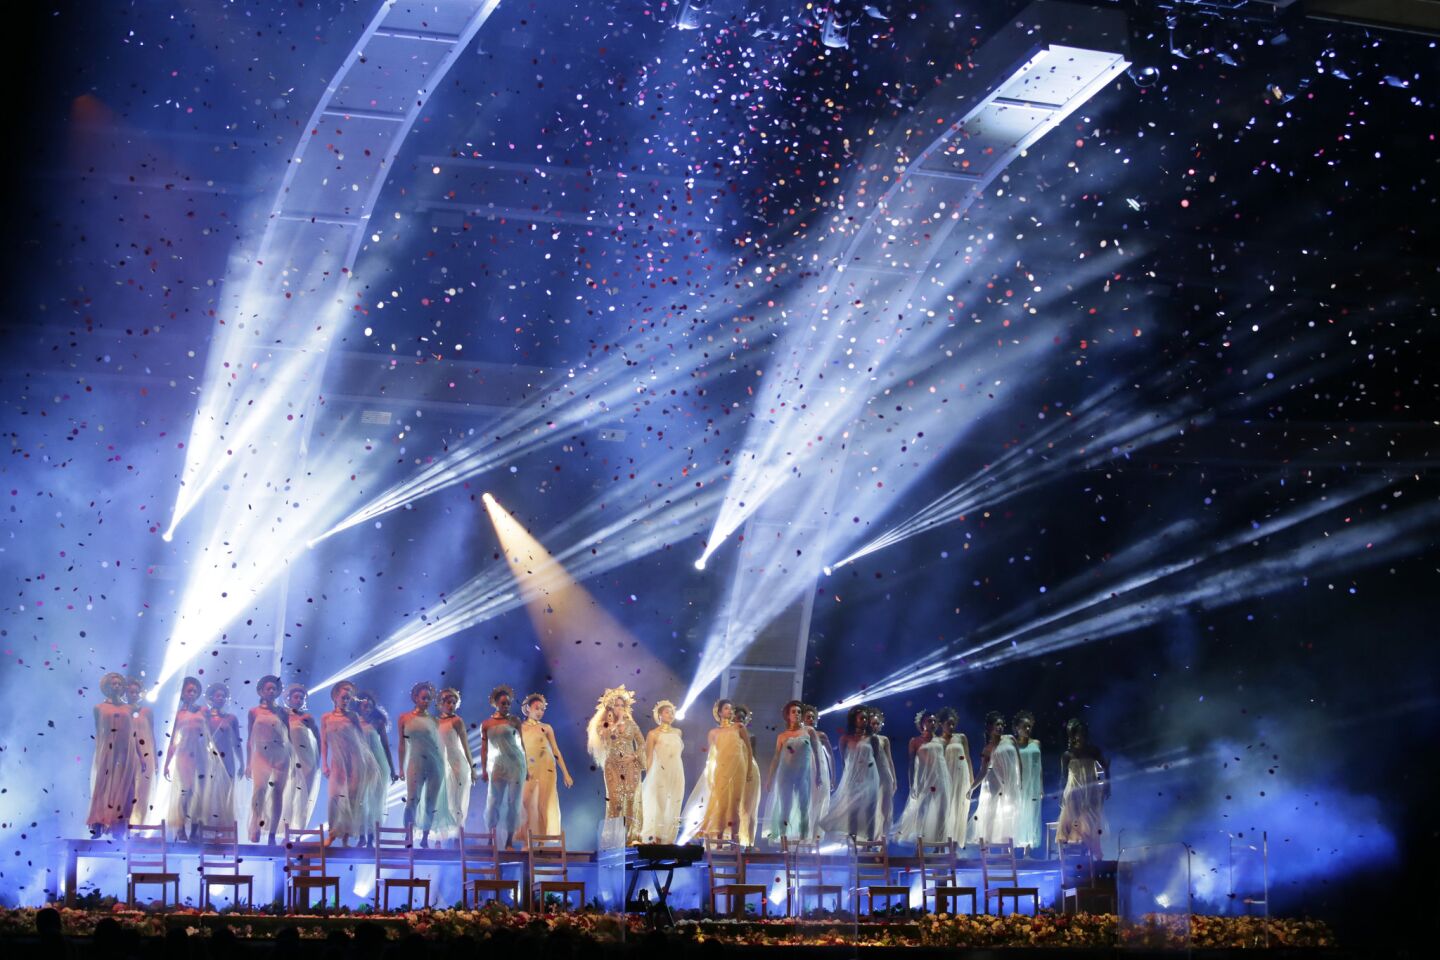 Spotlights set the mood as Beyoncé performs onstage at the Grammys.